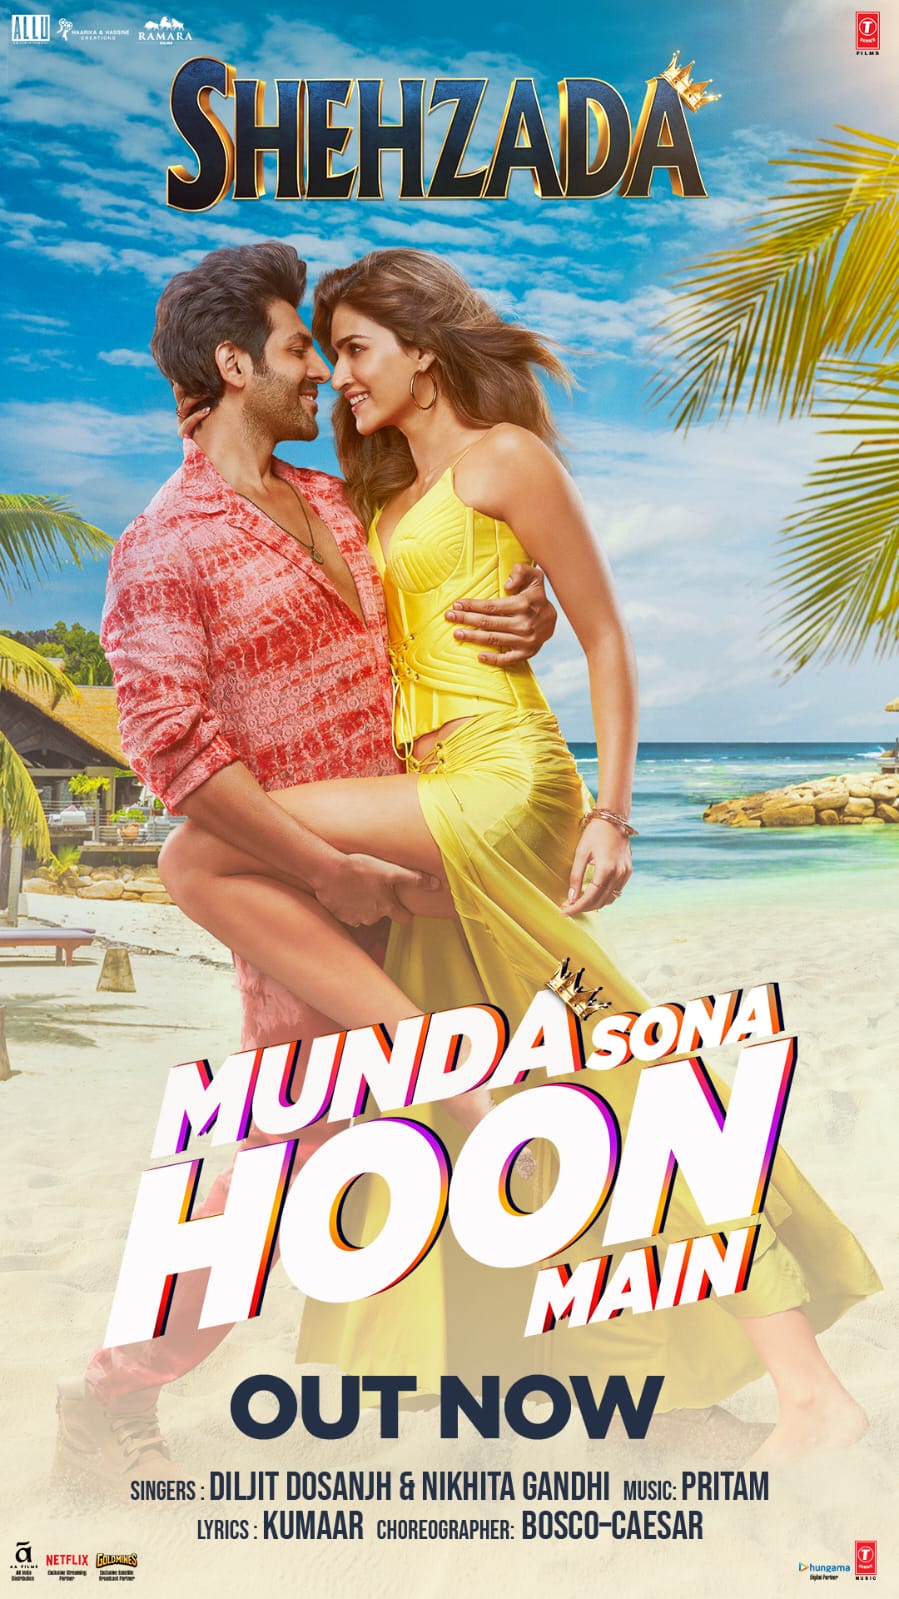 Kartik And Kriti’s Hot Chemistry Is An Ideal Peppy Number This Season With Munda Sona Hoon Main from Shehzada